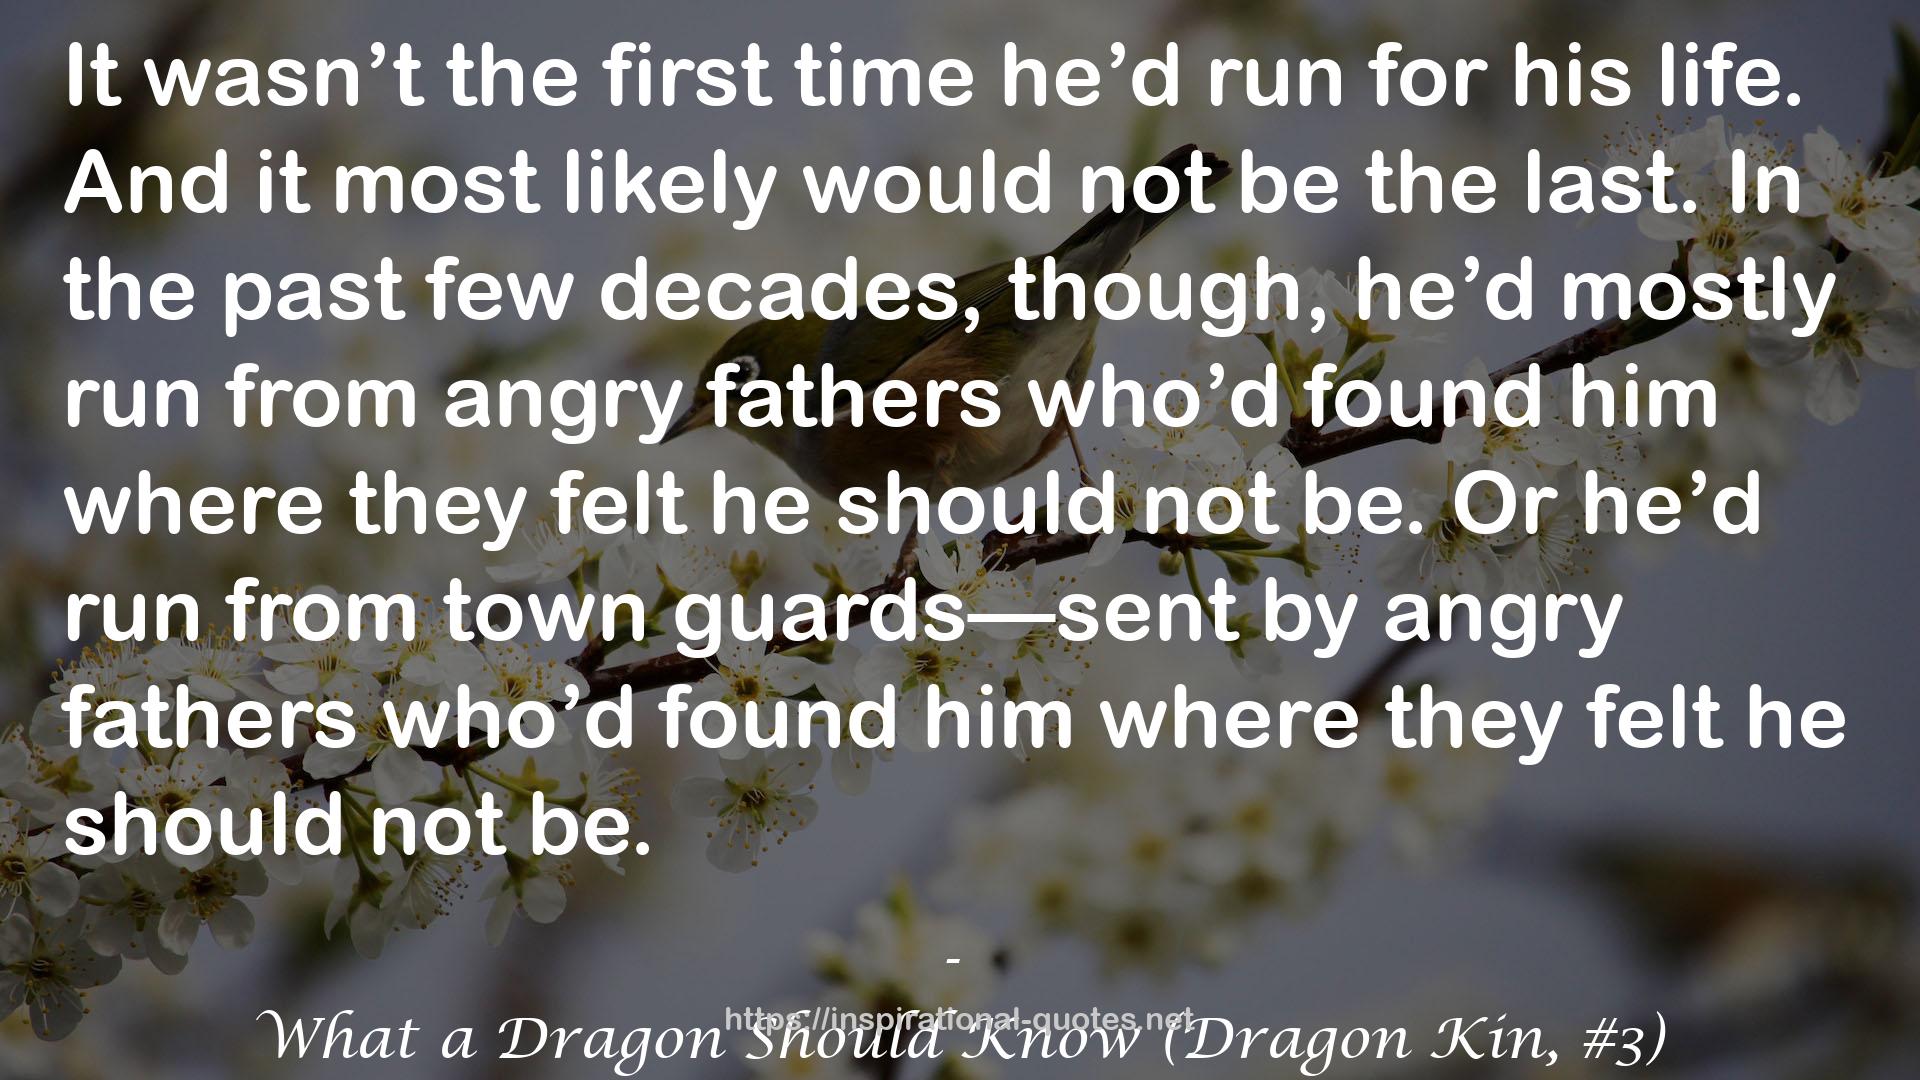 What a Dragon Should Know (Dragon Kin, #3) QUOTES